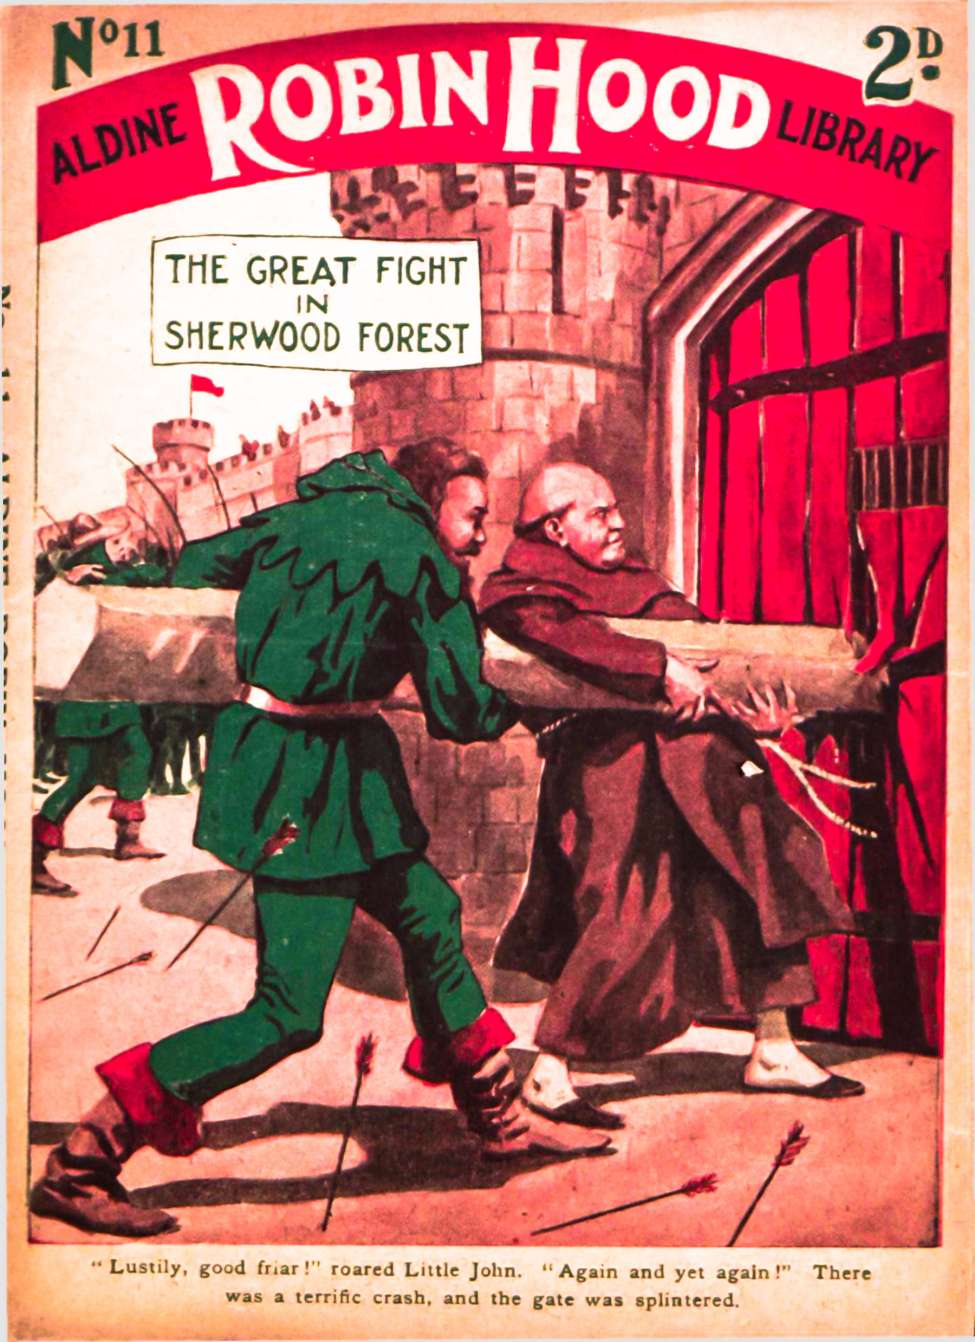 Book Cover For Aldine Robin Hood Library 11 - The Great Fight in Sherwood Forest